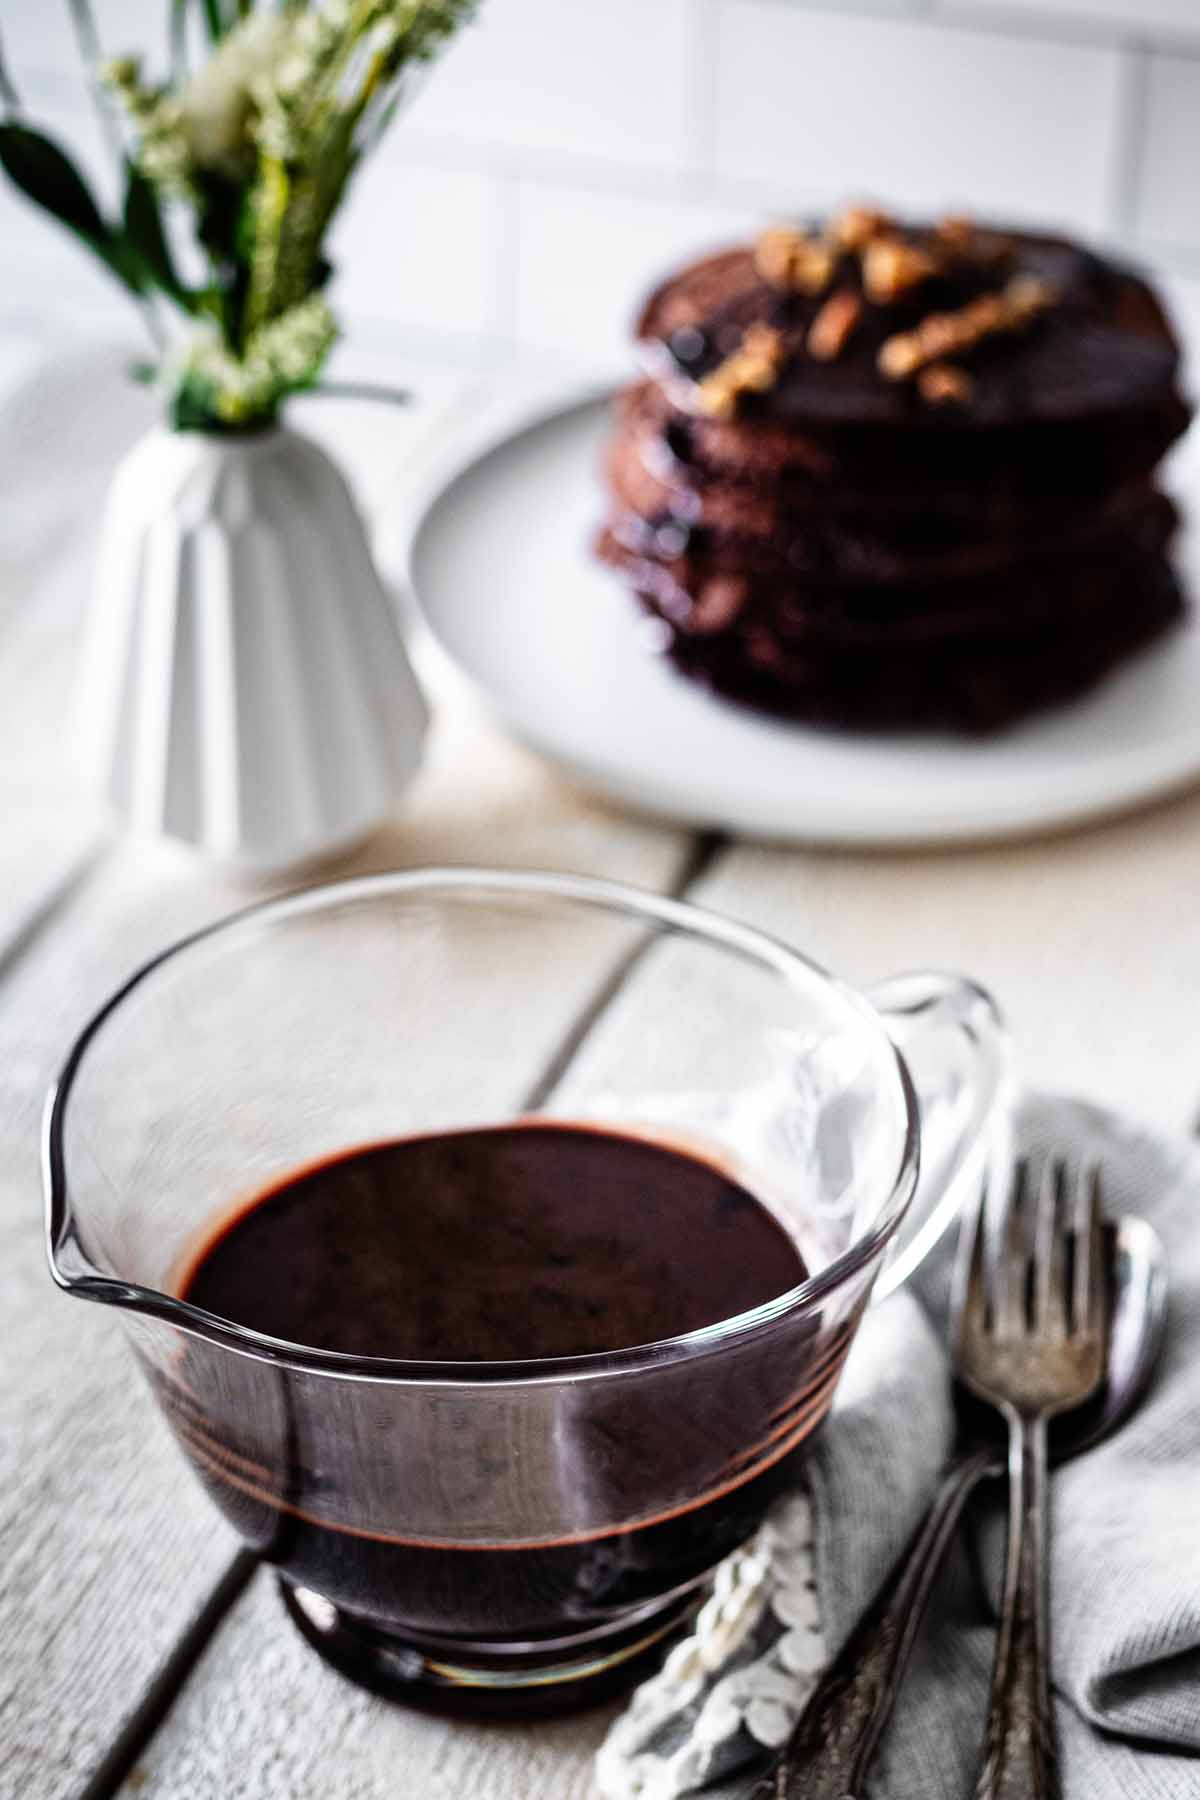 Chocolate pancake syrup in a small glass pitcher.